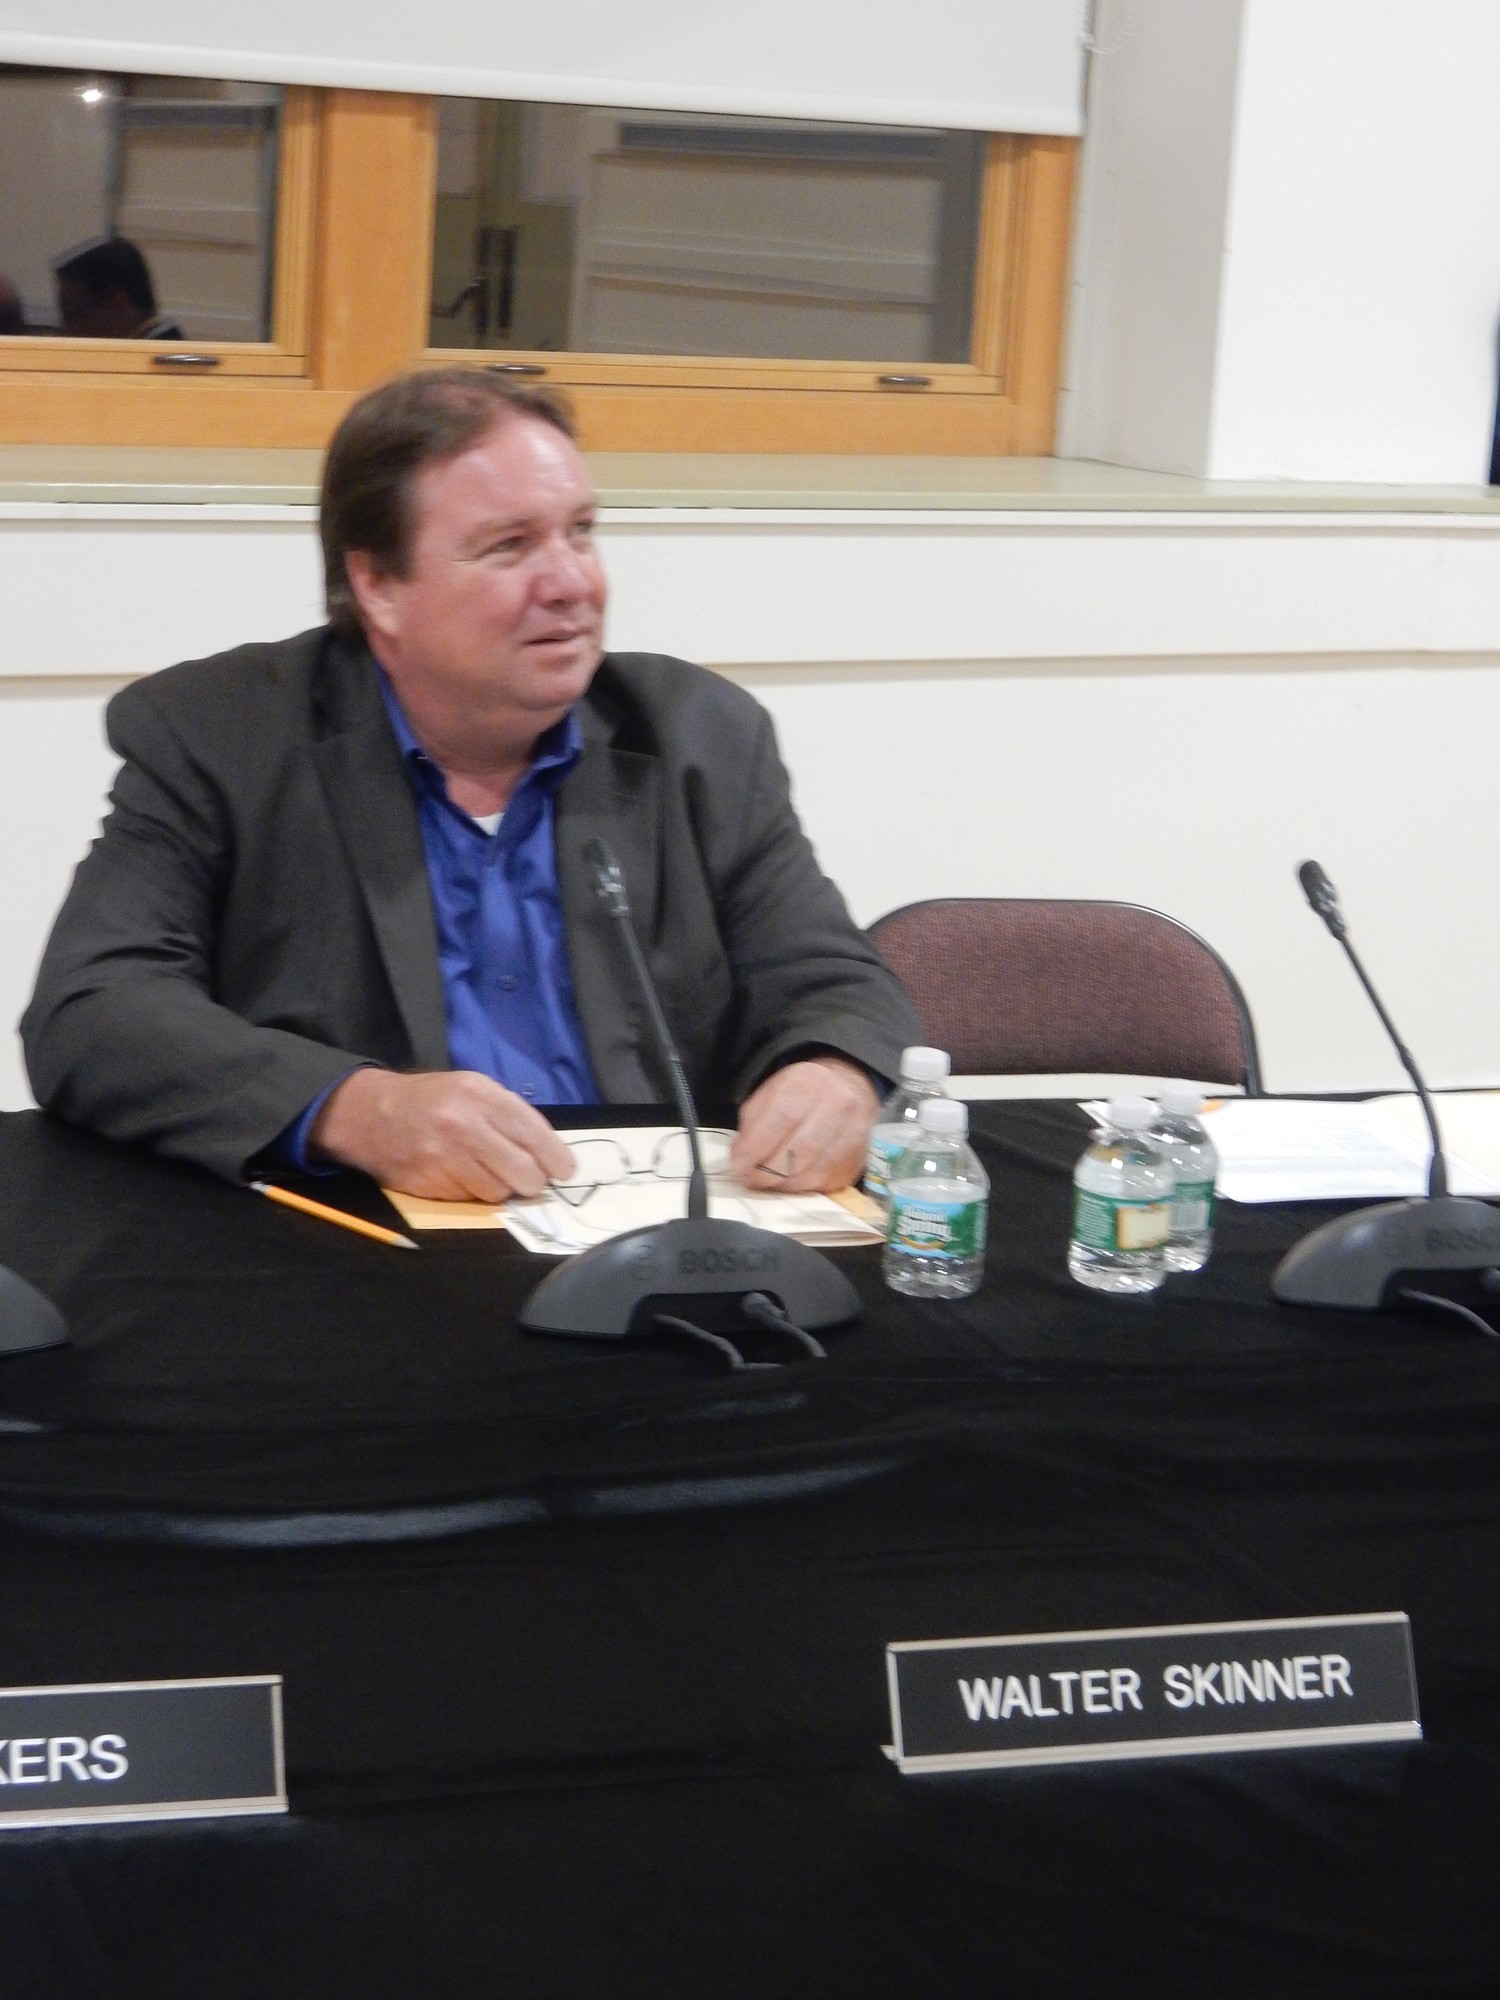 Walter Skinner, a Board of Education trustee since 2006, who will relinquish his seat at the end of the school year, received a standing ovation from the audience at last week’s board meeting.